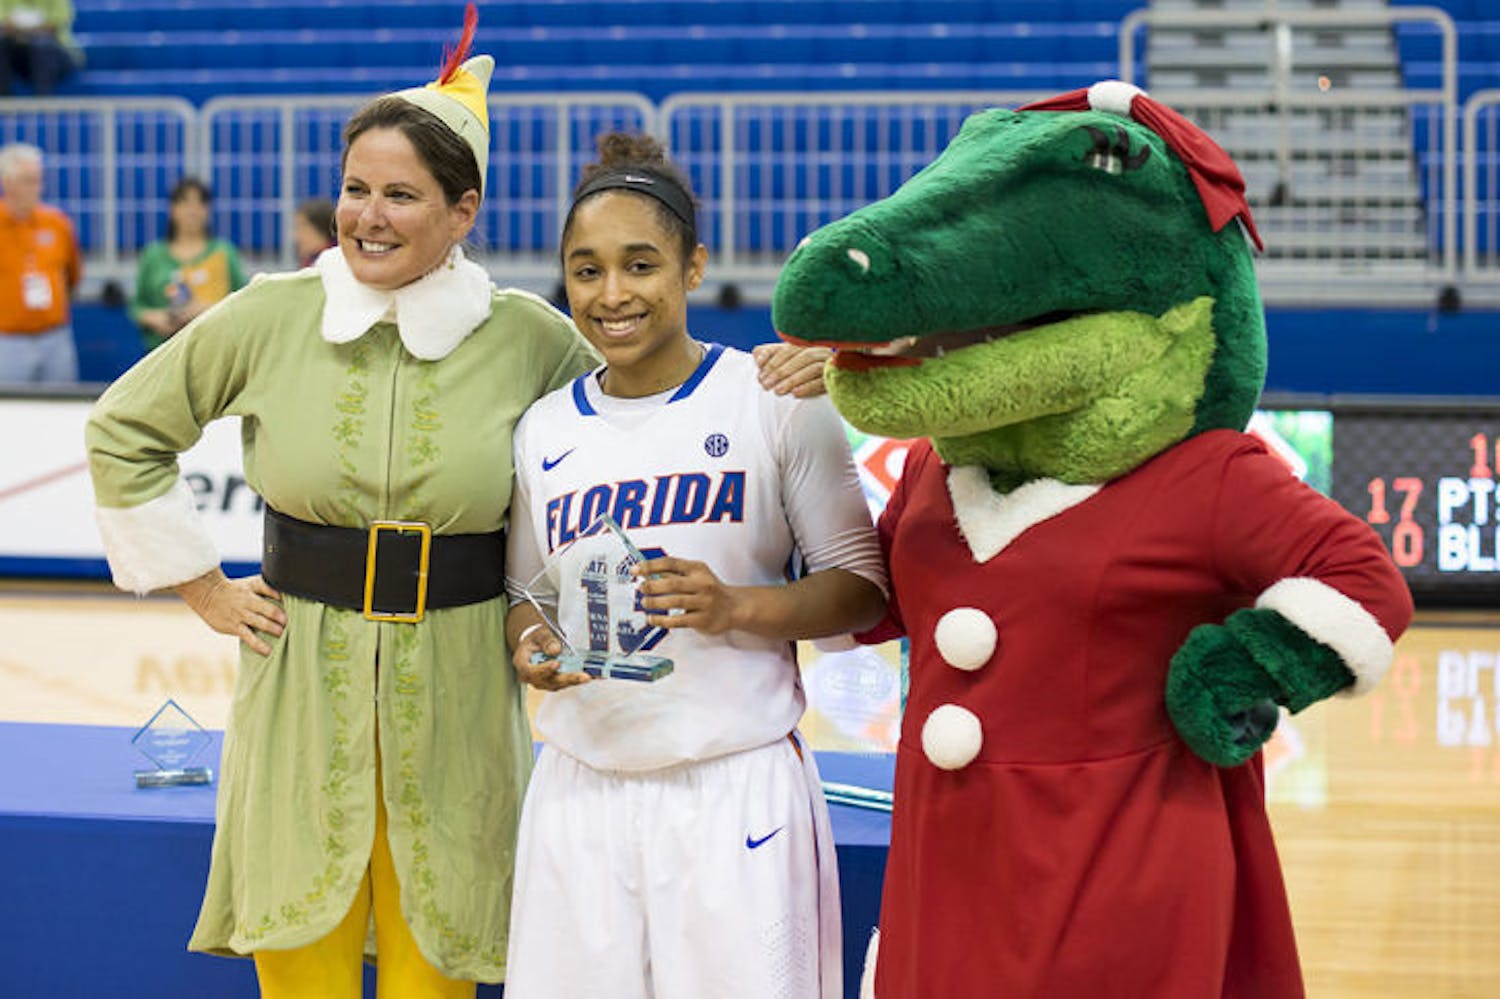 UF soccer coach Becky Burleigh and mascot Alberta present redshirt sophomore Cassie Peoples with the tournament MVP award after Florida's 90-74 win over FIU on Saturday in the O’Connell Center.